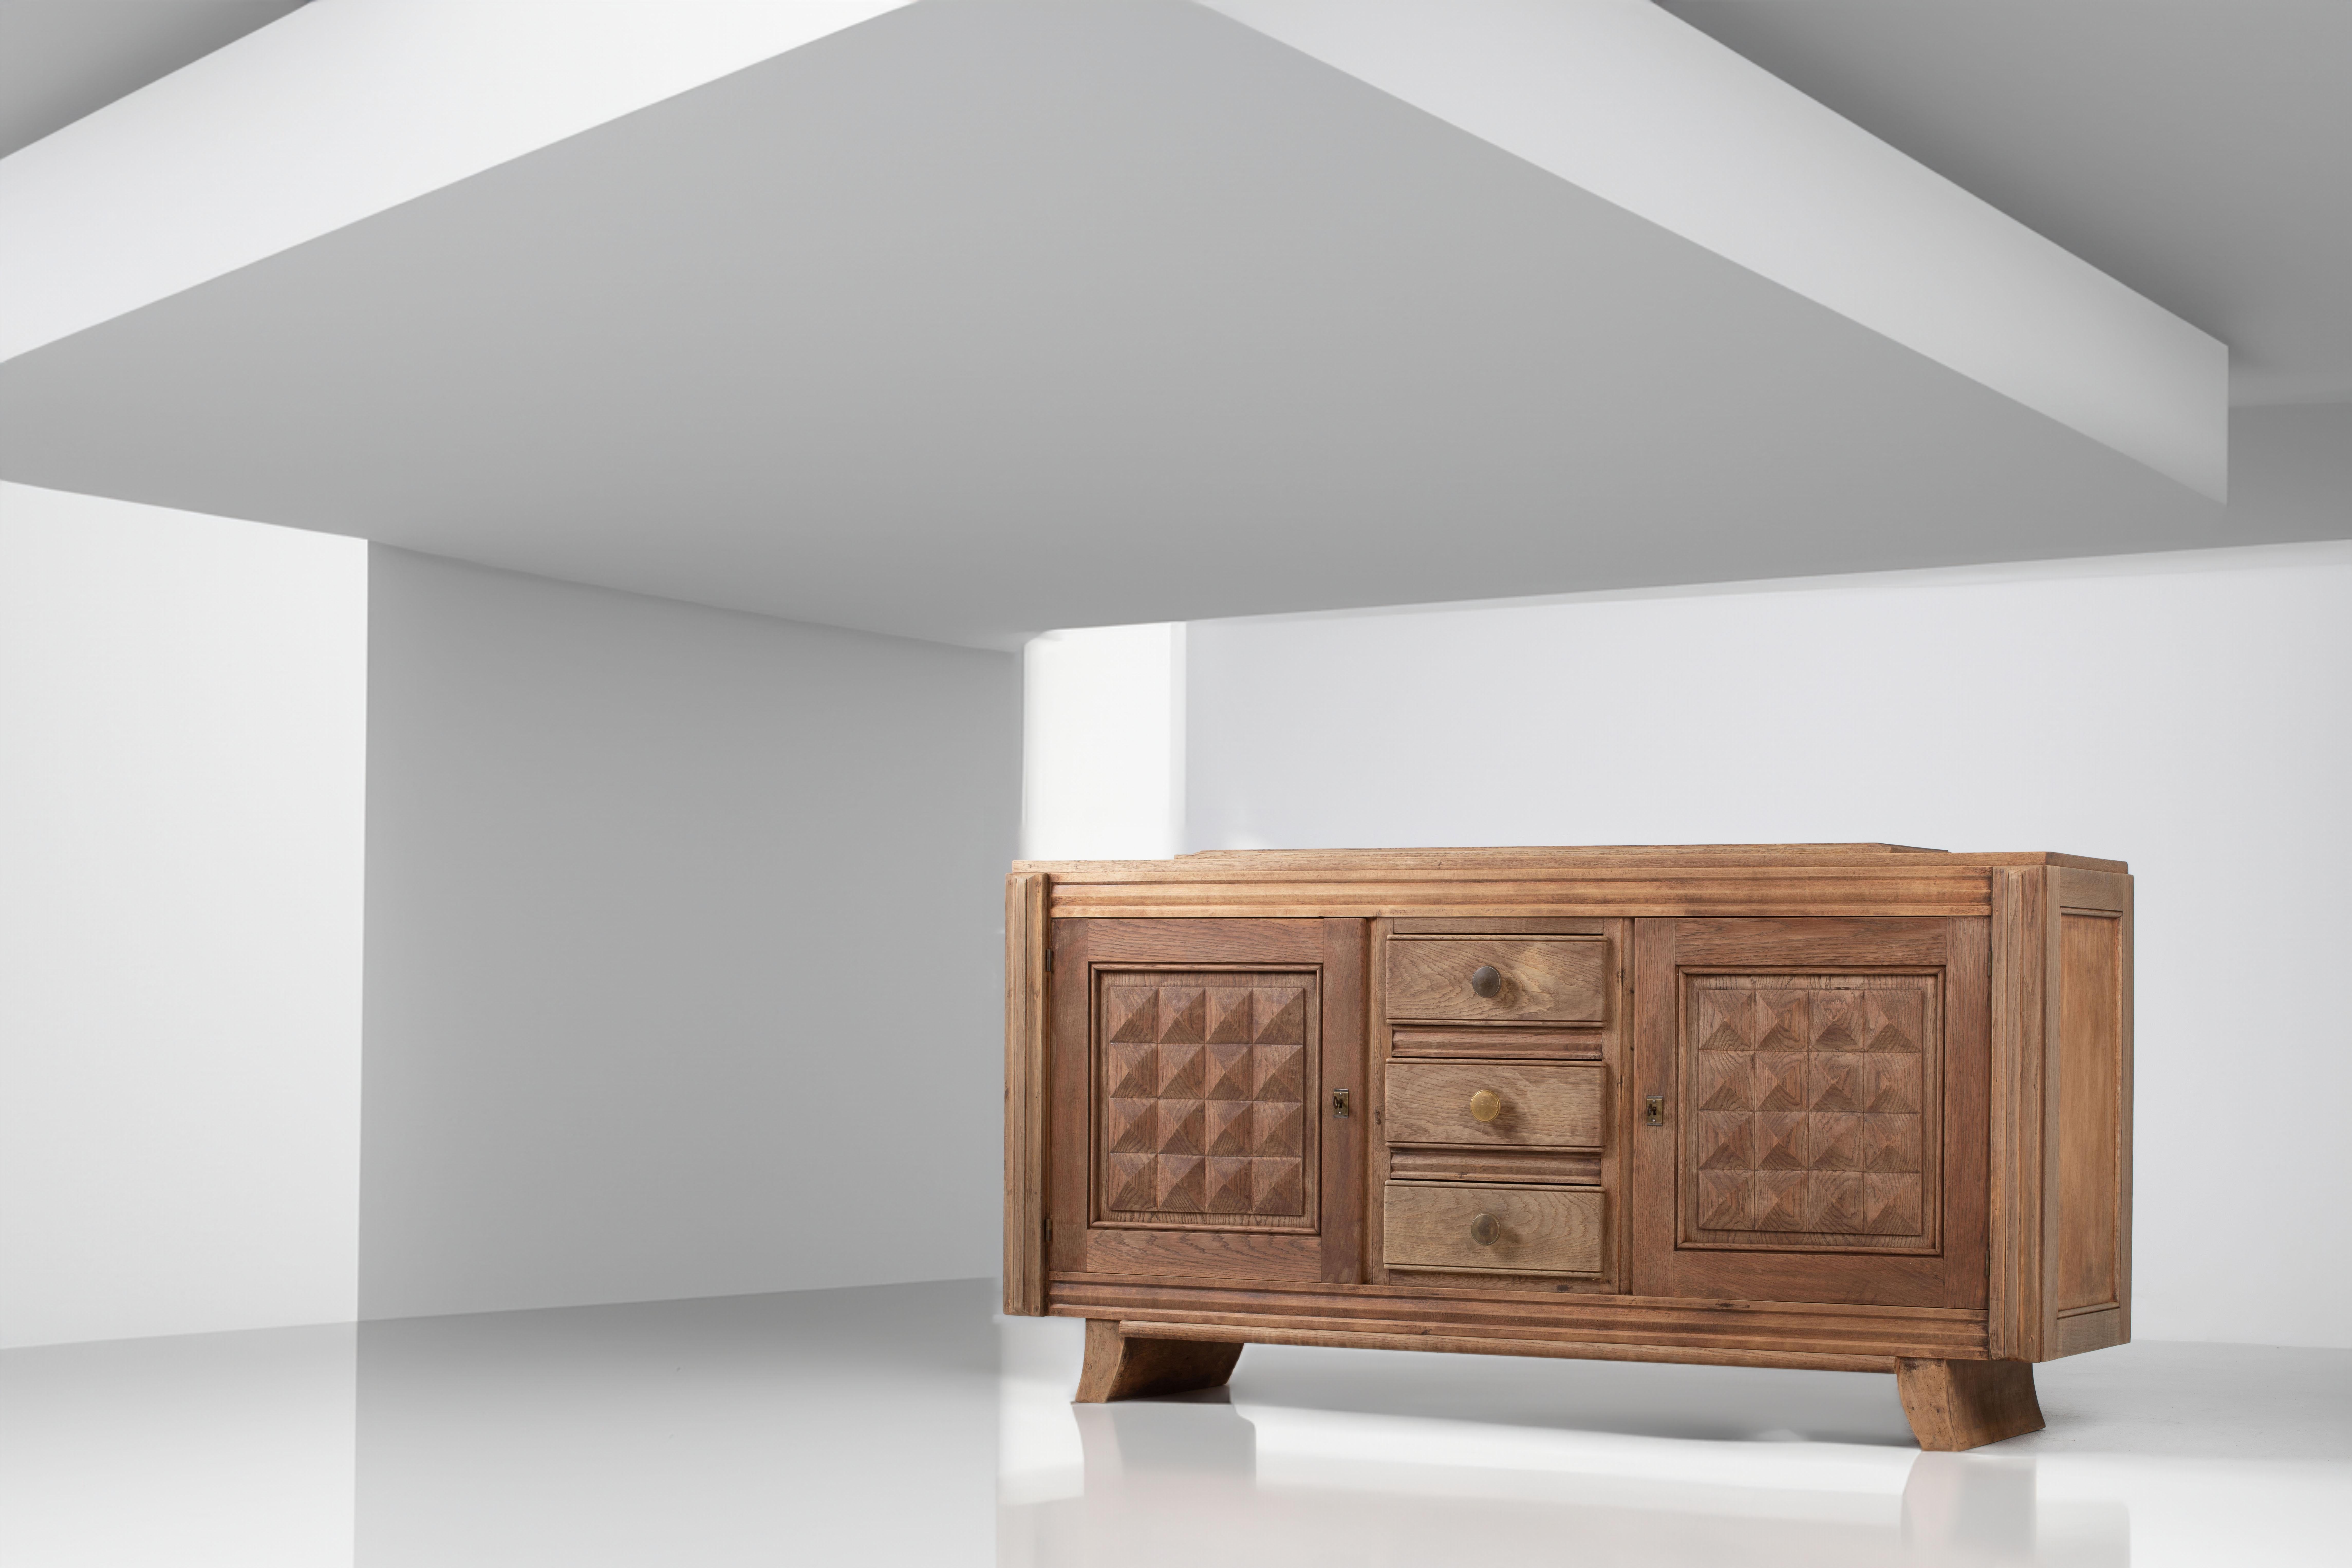 Step into the captivating world of Charles Dudouyt with this remarkable solid oak credenza from 1940s France. Designed in the style reminiscent of Dudouyt's iconic creations, this art deco brutalist sideboard showcases the perfect blend of elegance